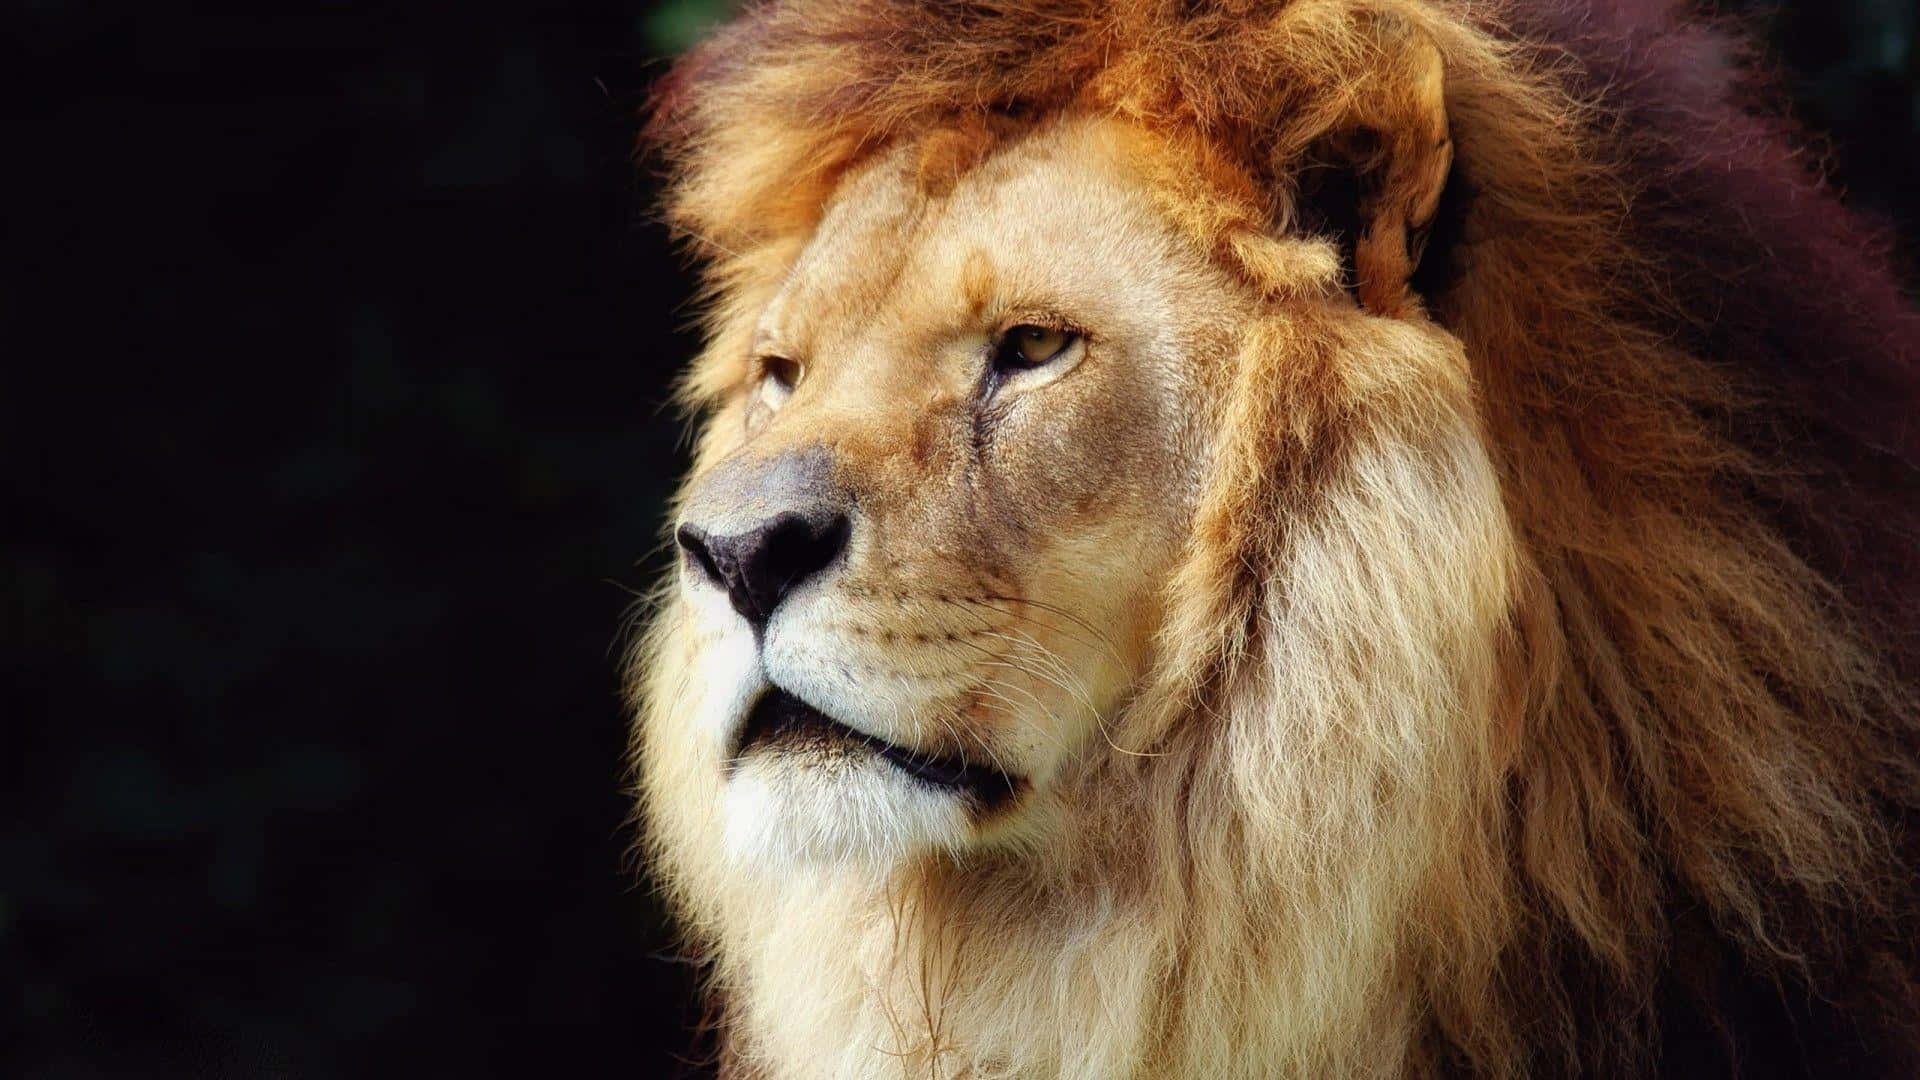 Intimidatingly fierce and powerful, the lion face is an iconic symbol of courage, strength and nobility.